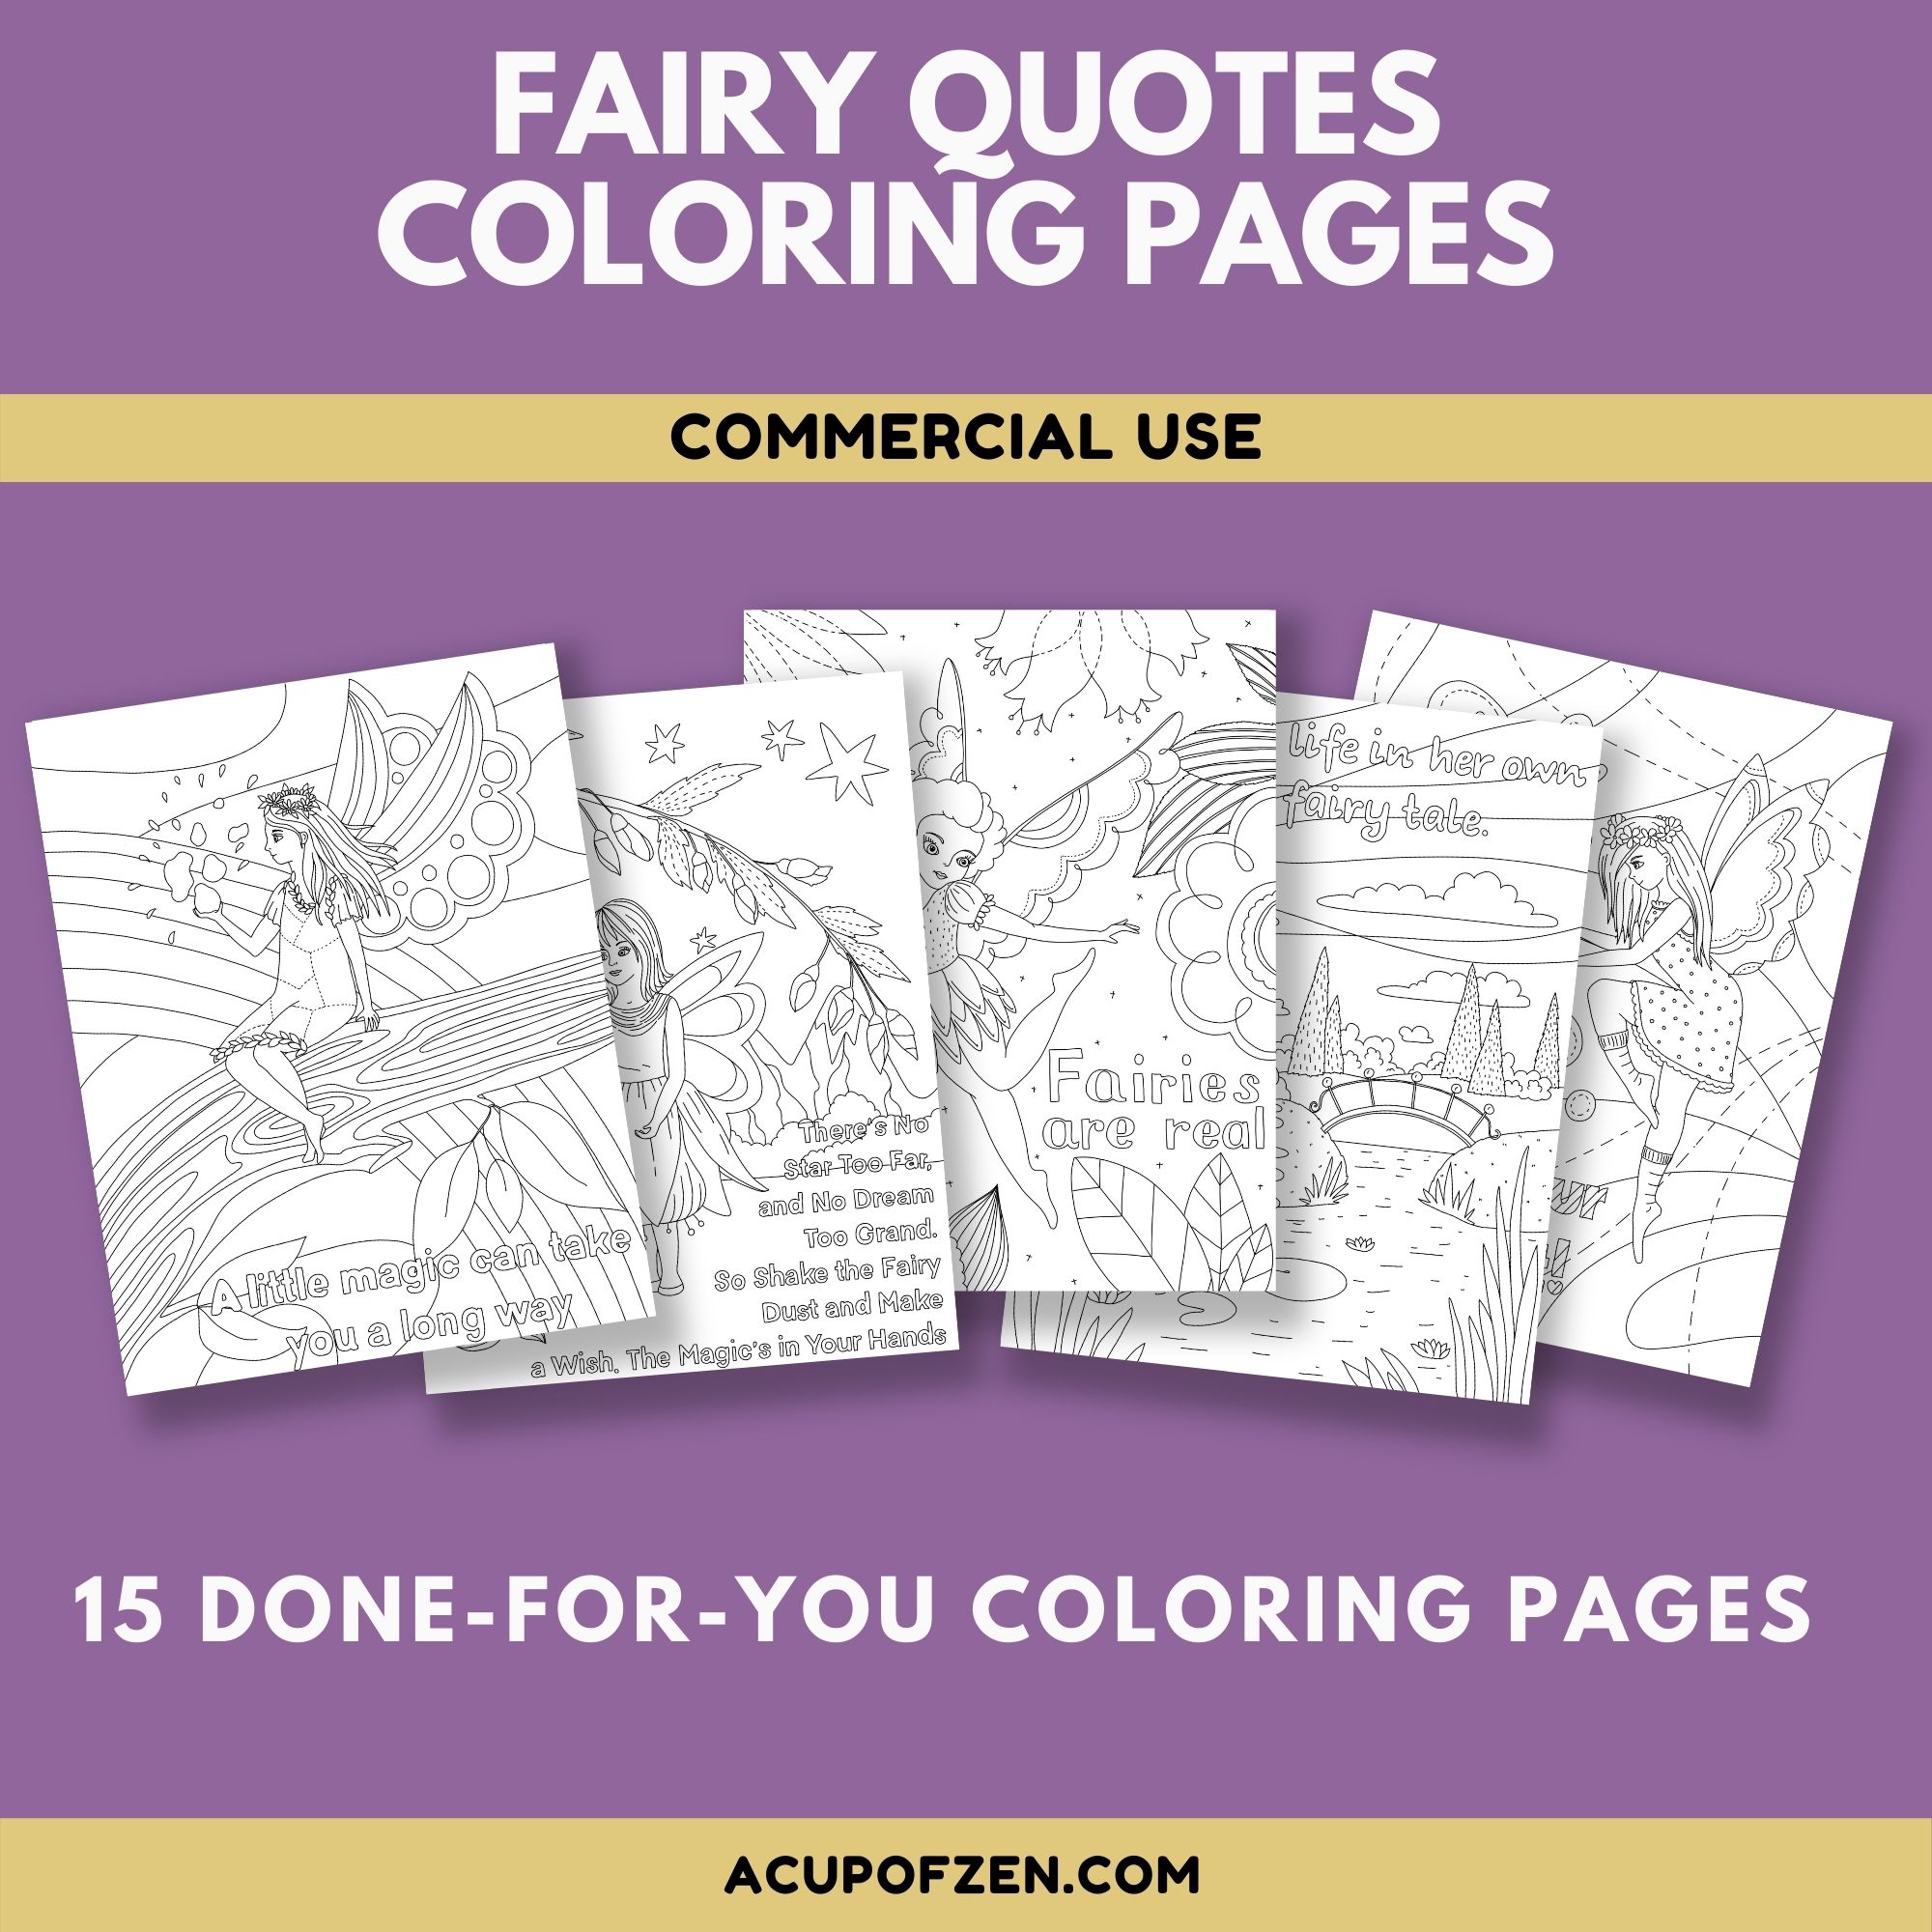 Fairy Quotes Coloring Pages